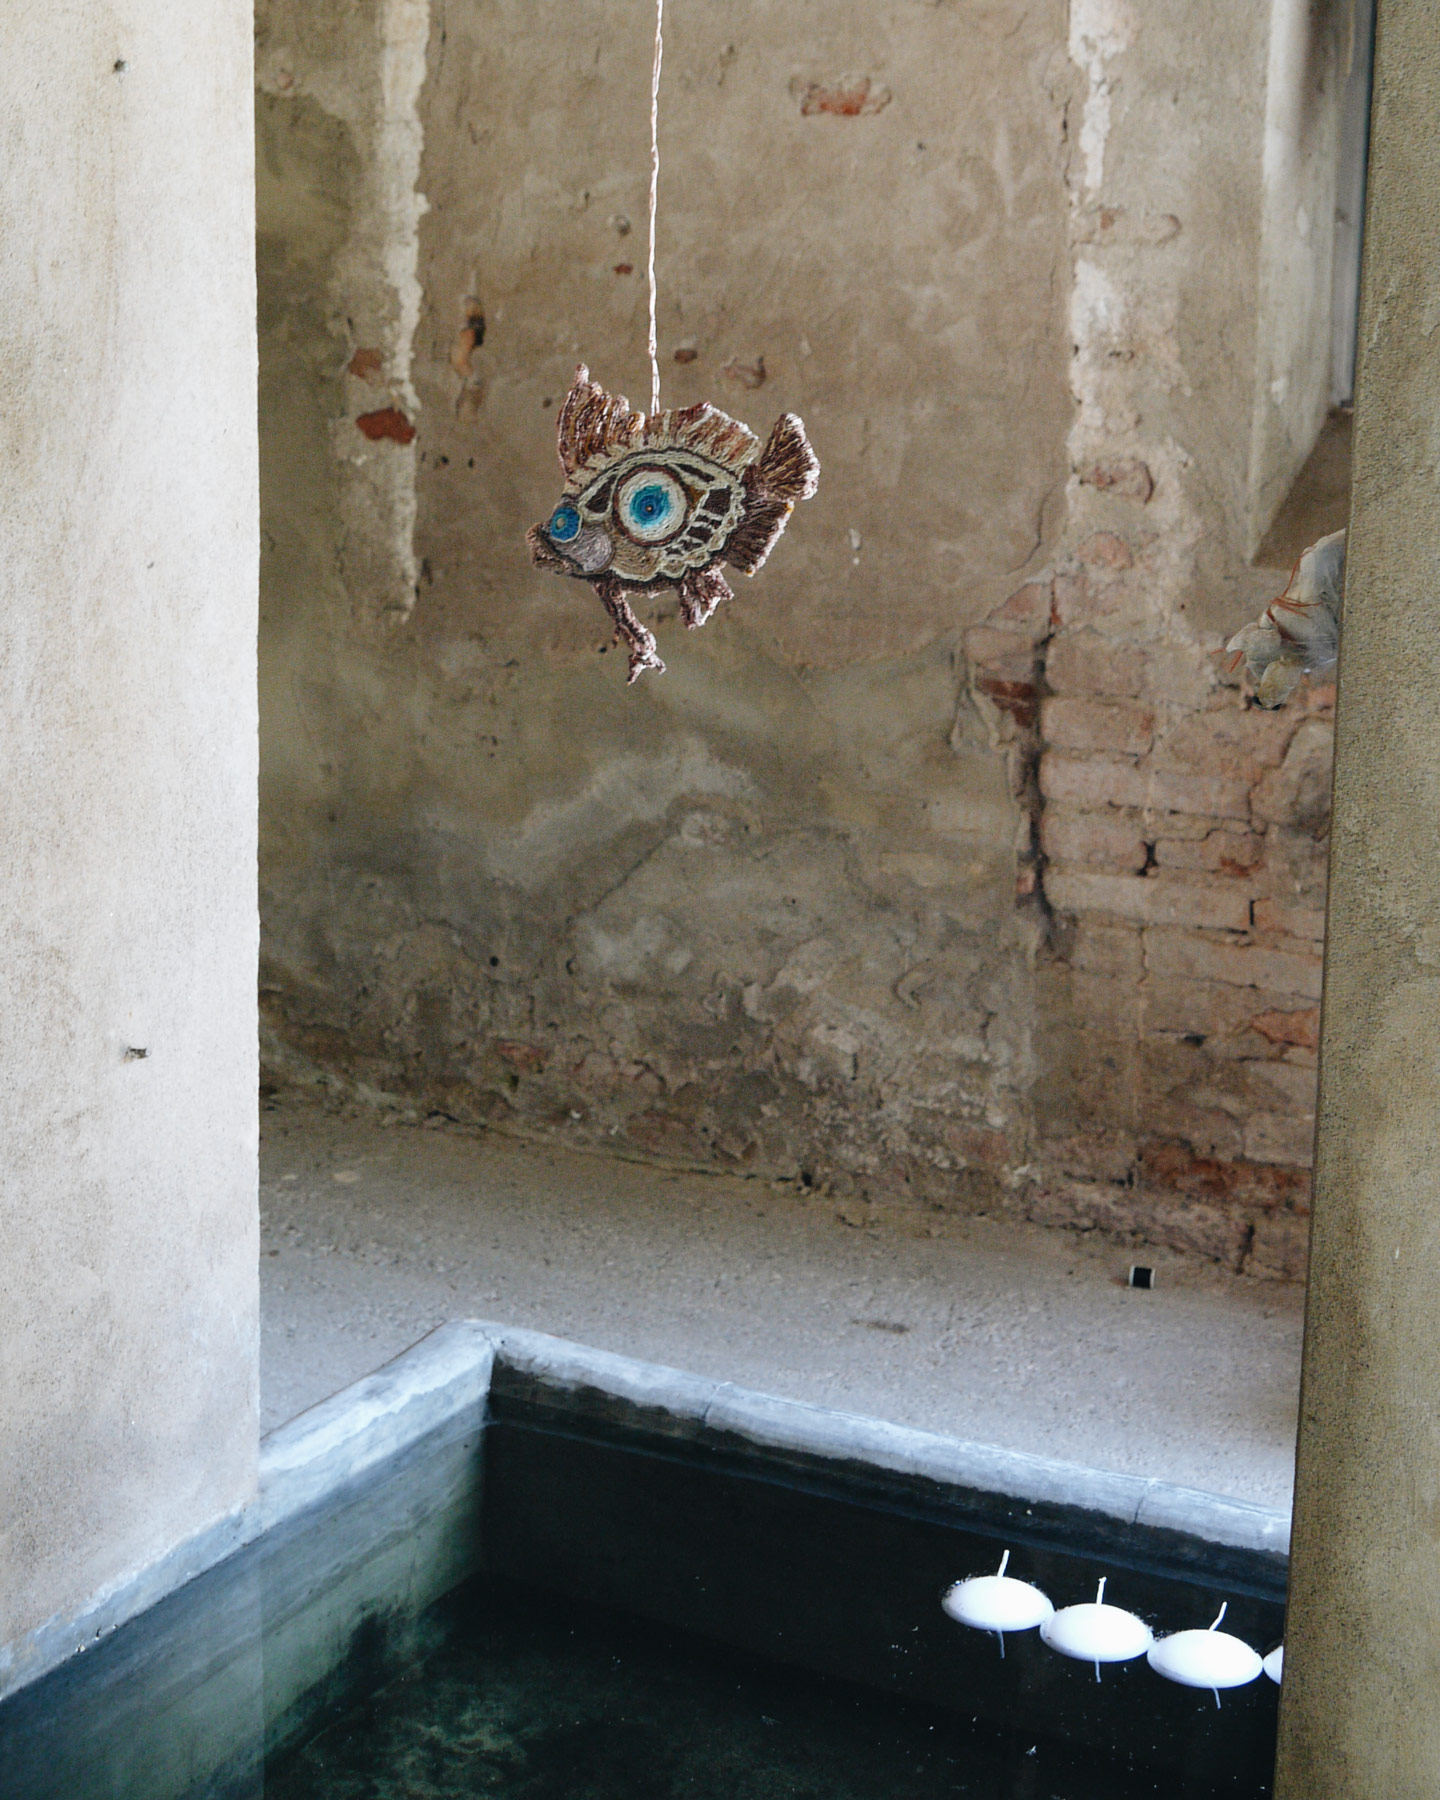 Artfarm Pilastro 2019, Approssimazione. Corinna-Wollf Borgo, Little Chapel for the Other than Human, Shrines to the Waters